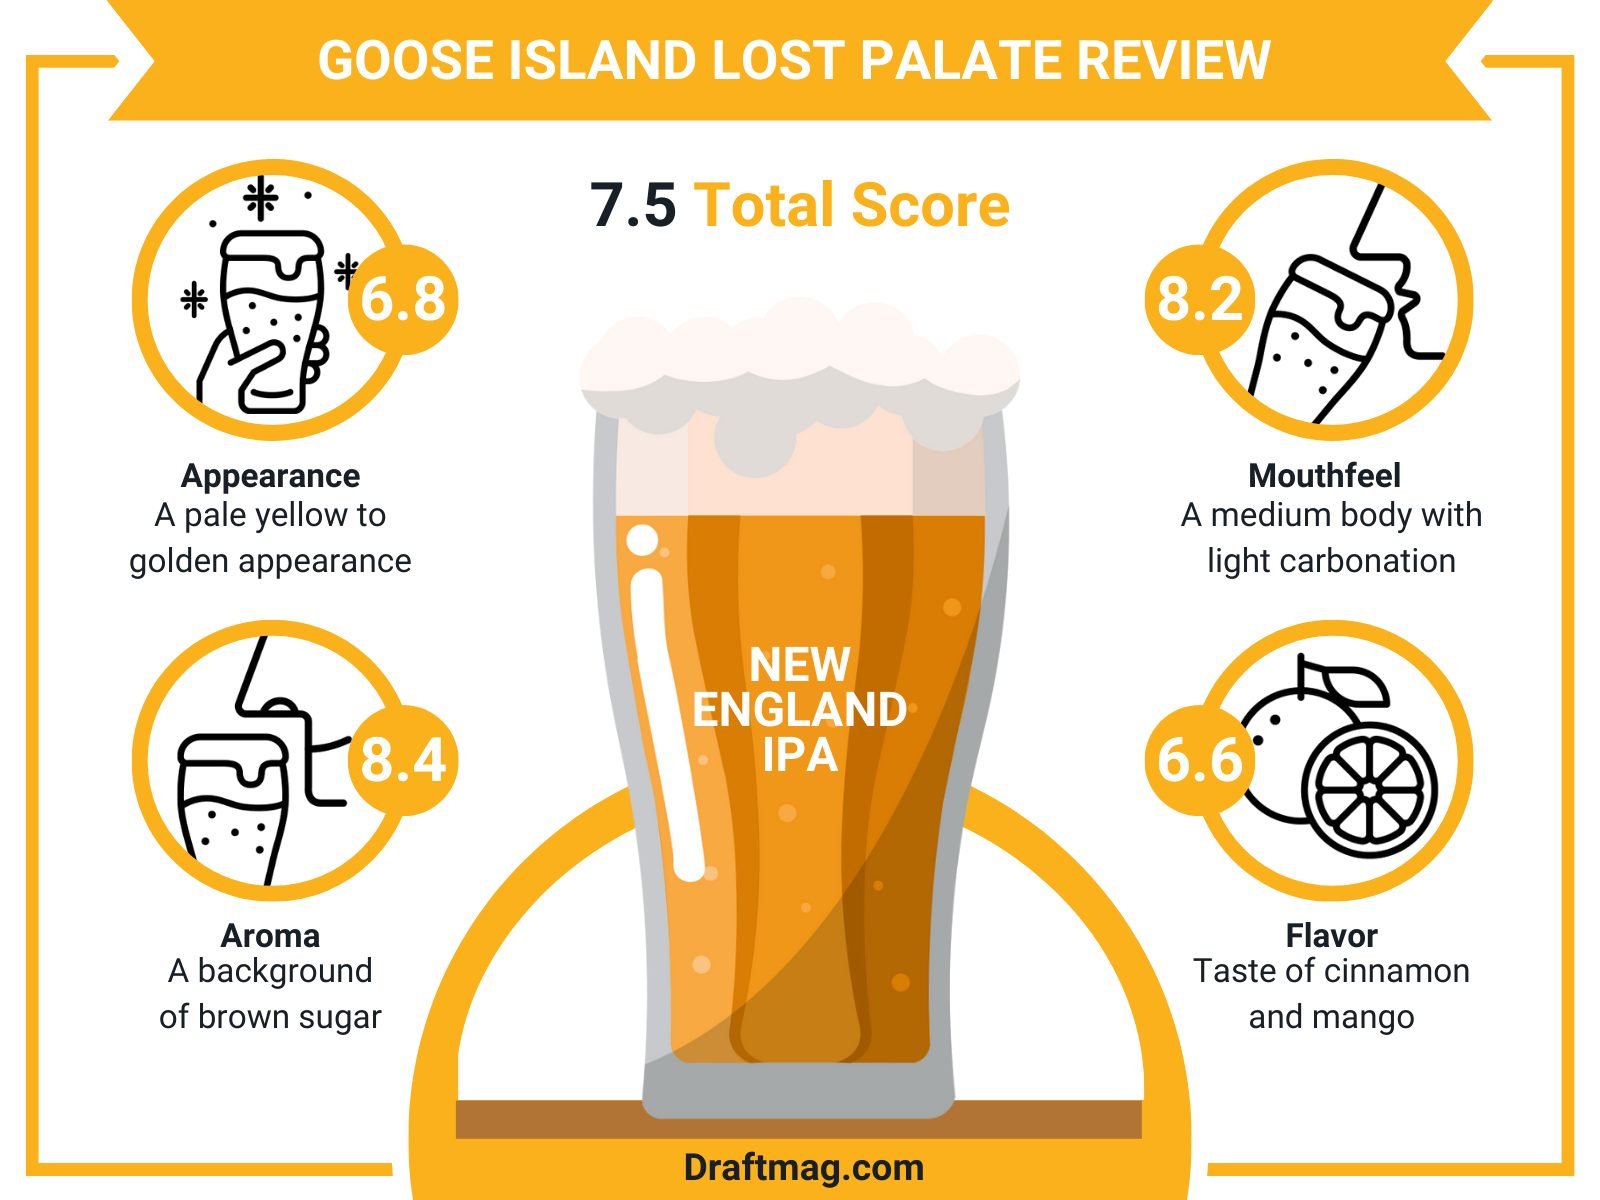 Goose Island Review Infographic